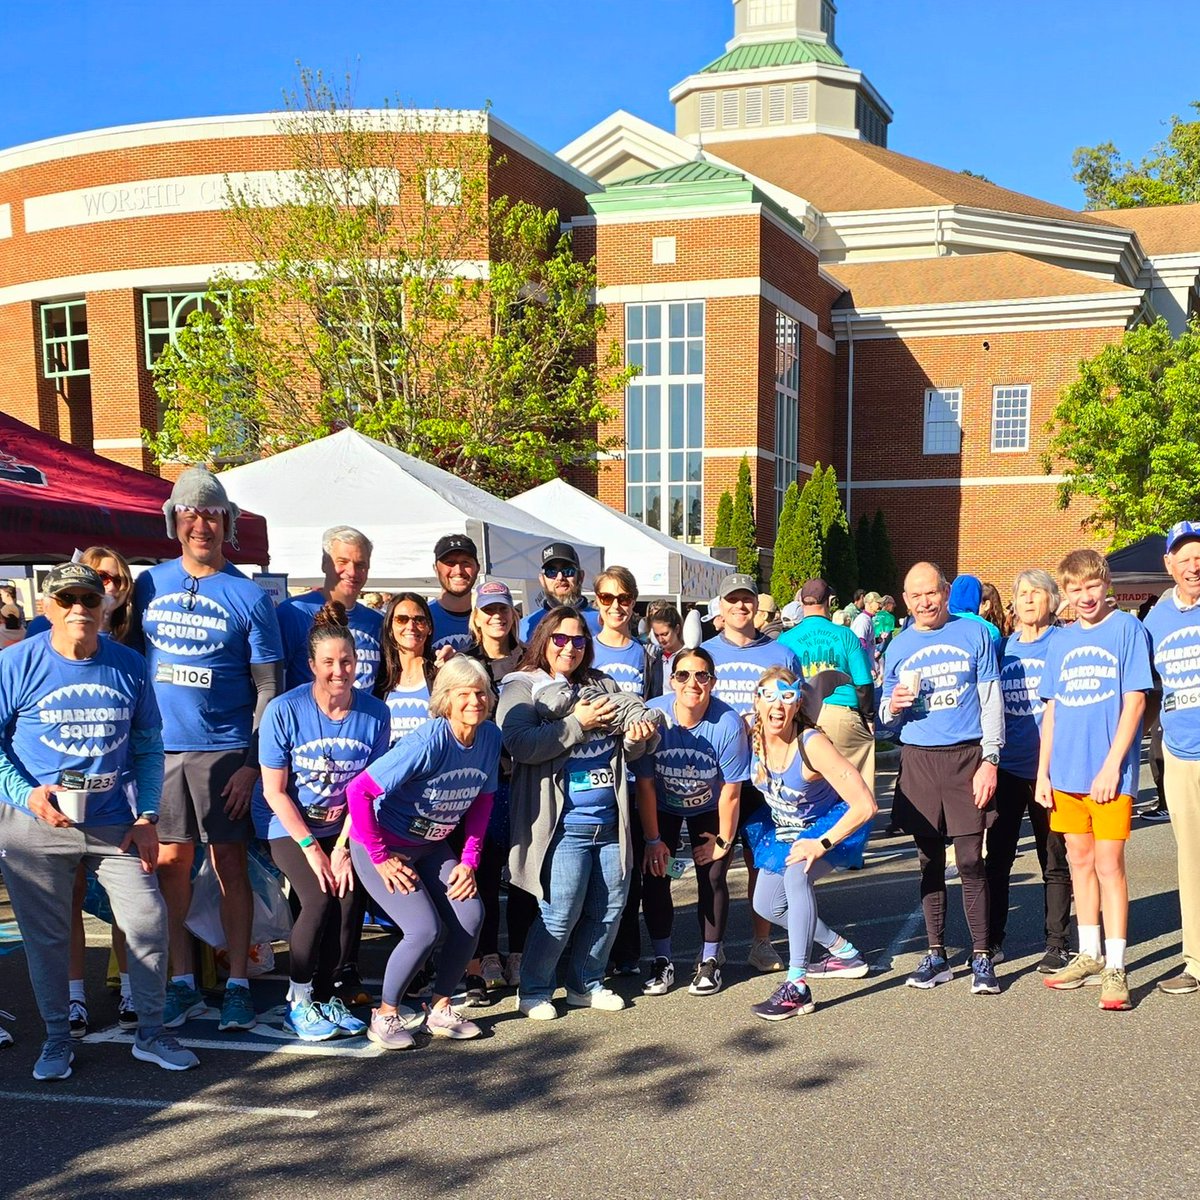 Congratulations to our friends at @PaulaTakacsFndn for the incredible success of their 13th Annual Sarcoma Stomp. Over 1,000 people participated on April 13, helping to raise a record $250,000+ for sarcoma research at @AtriumHealth @LevineCancer @LevineChildrens!🎗️